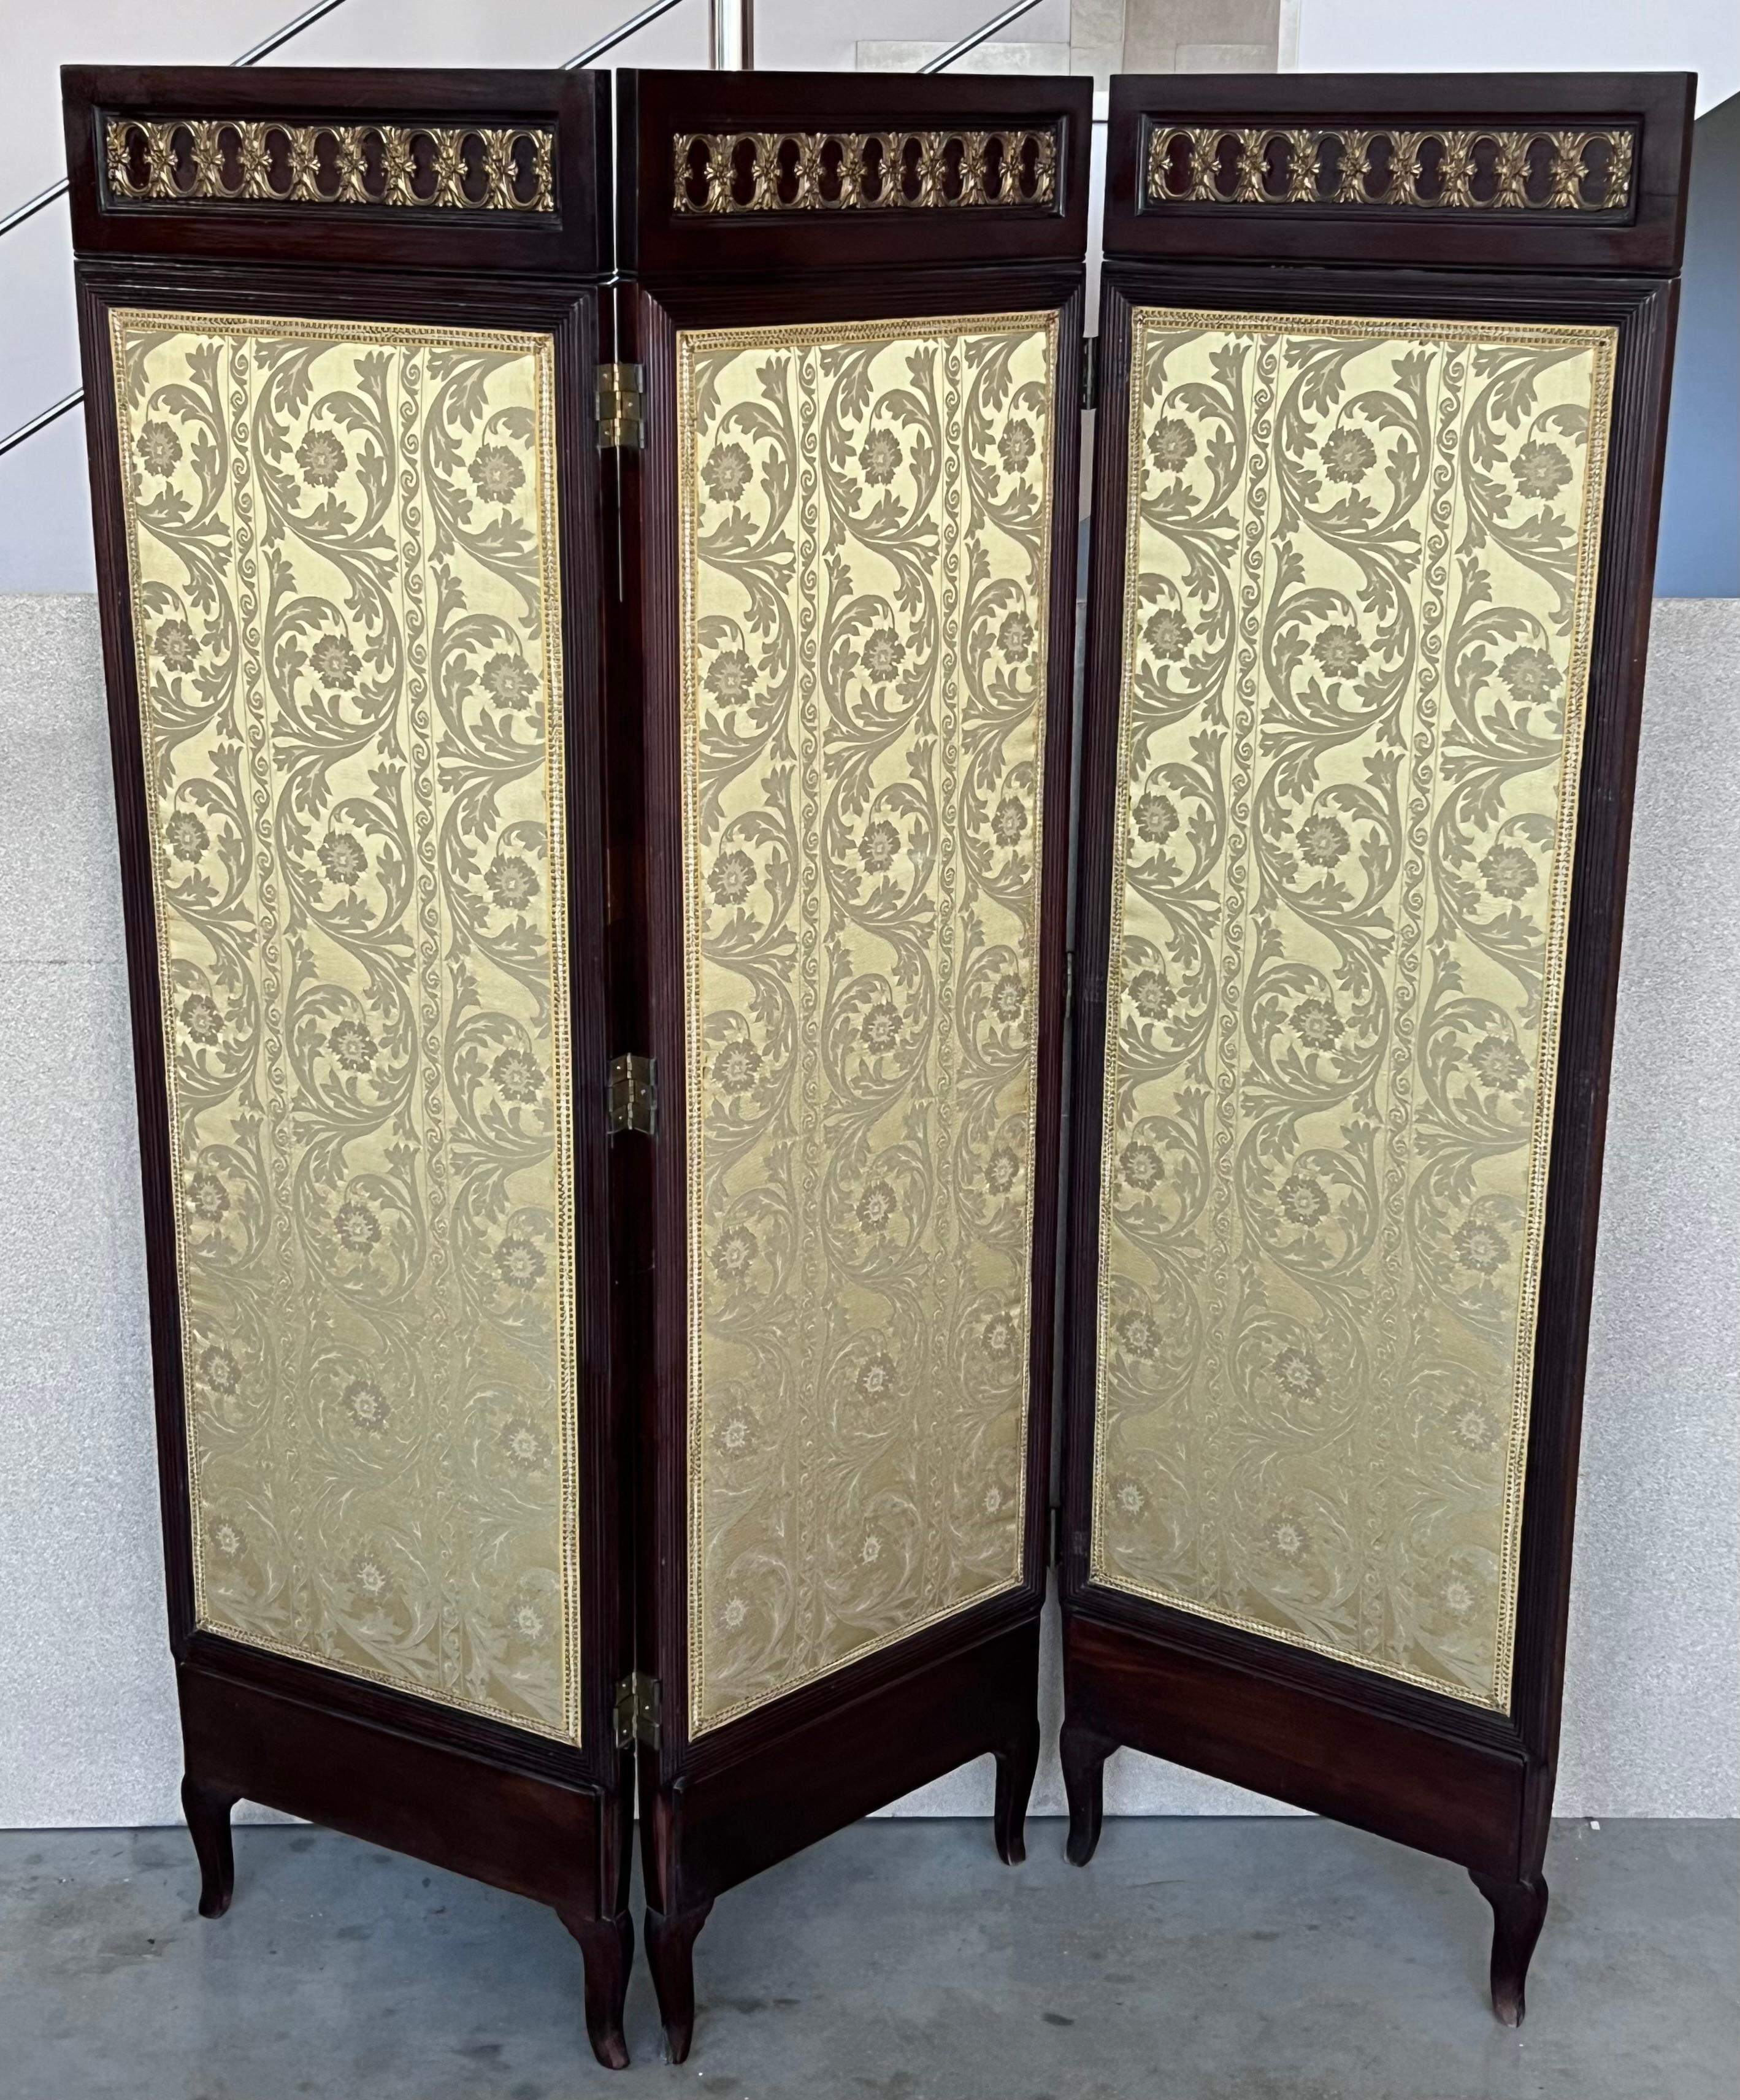 French Empire style (19th century) mahogany 3 fold screen with bronze trim.